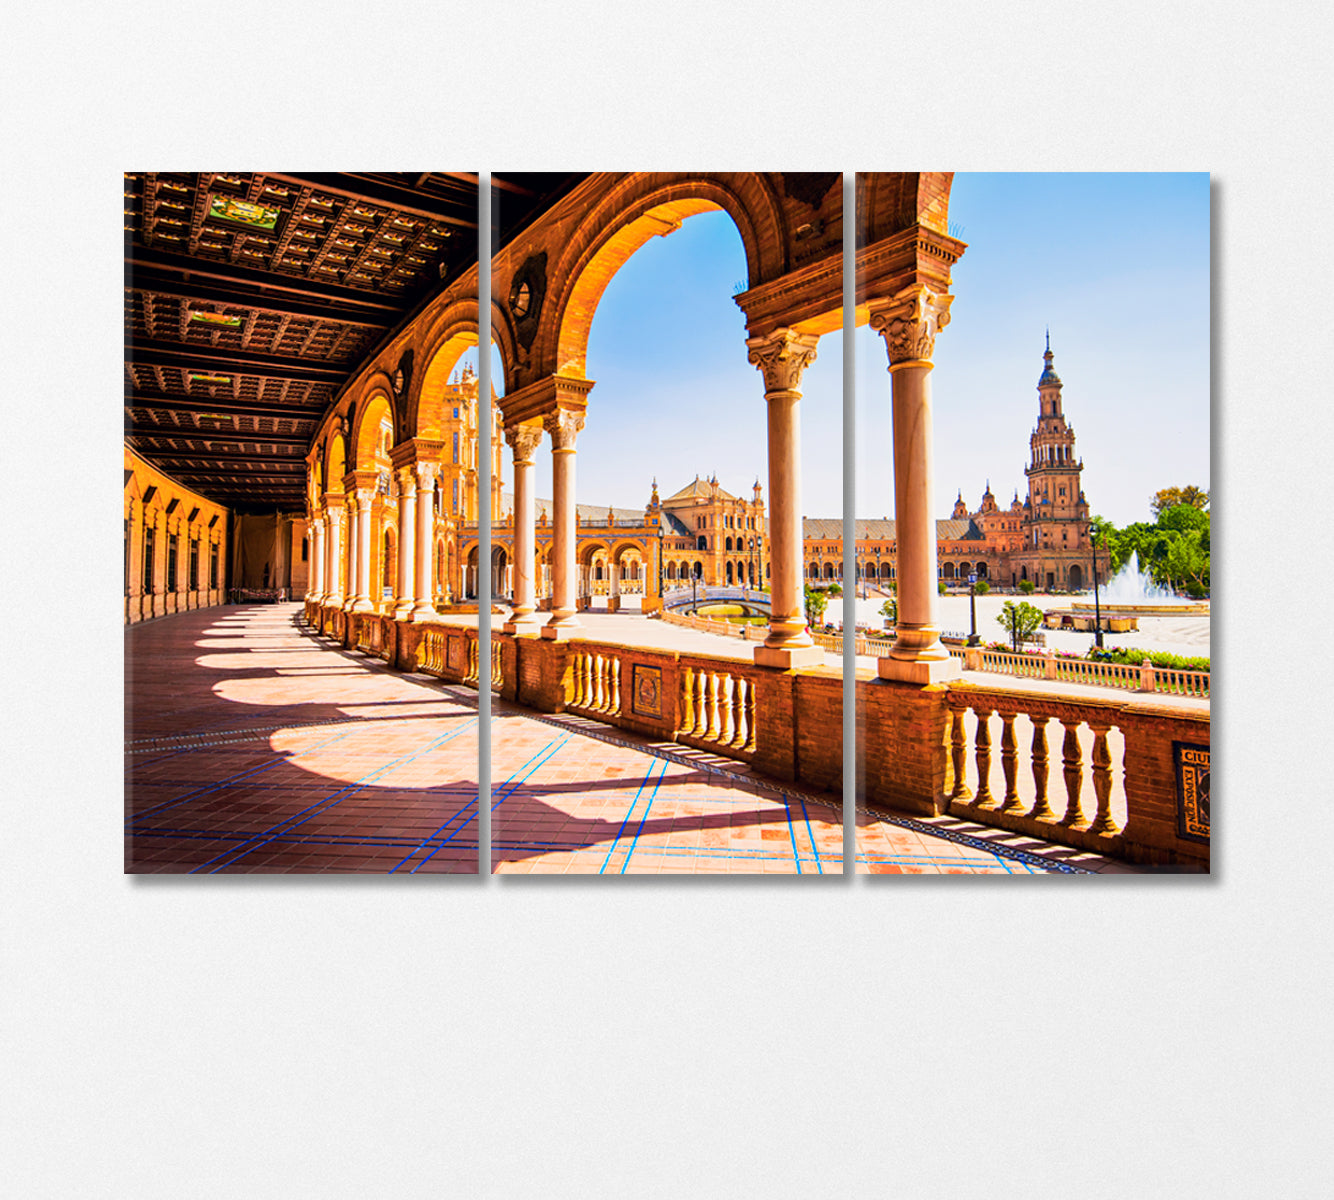 Columns and Arches at Spain Square Canvas Print-CetArt-3 Panels-36x24 inches-CetArt